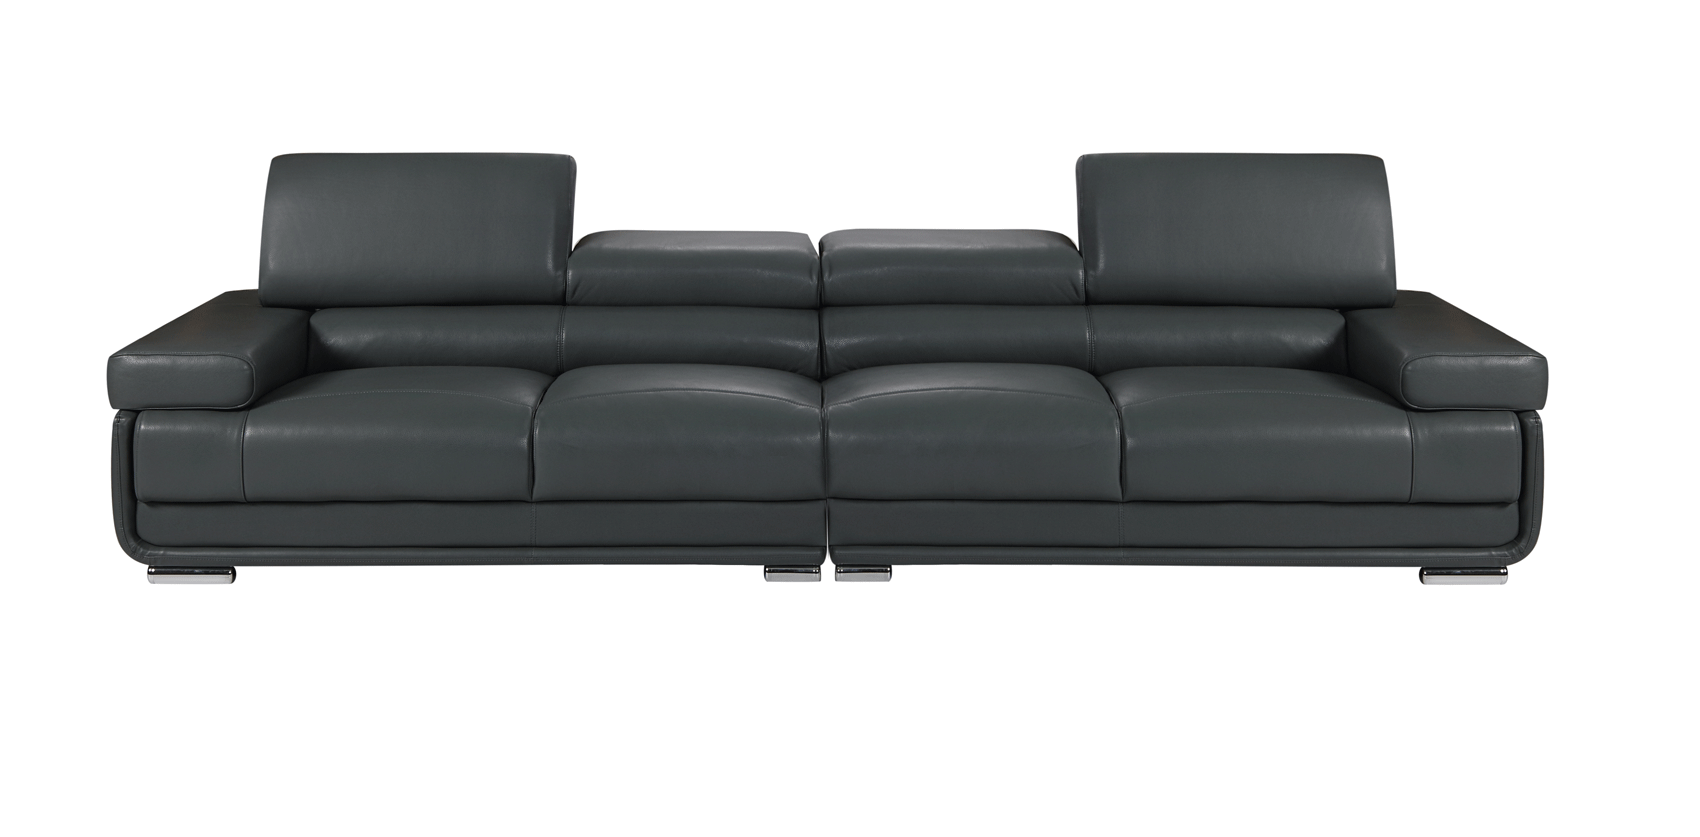 Living Room Furniture Reclining and Sliding Seats Sets 2119 Sofa, Loveseat, Chair